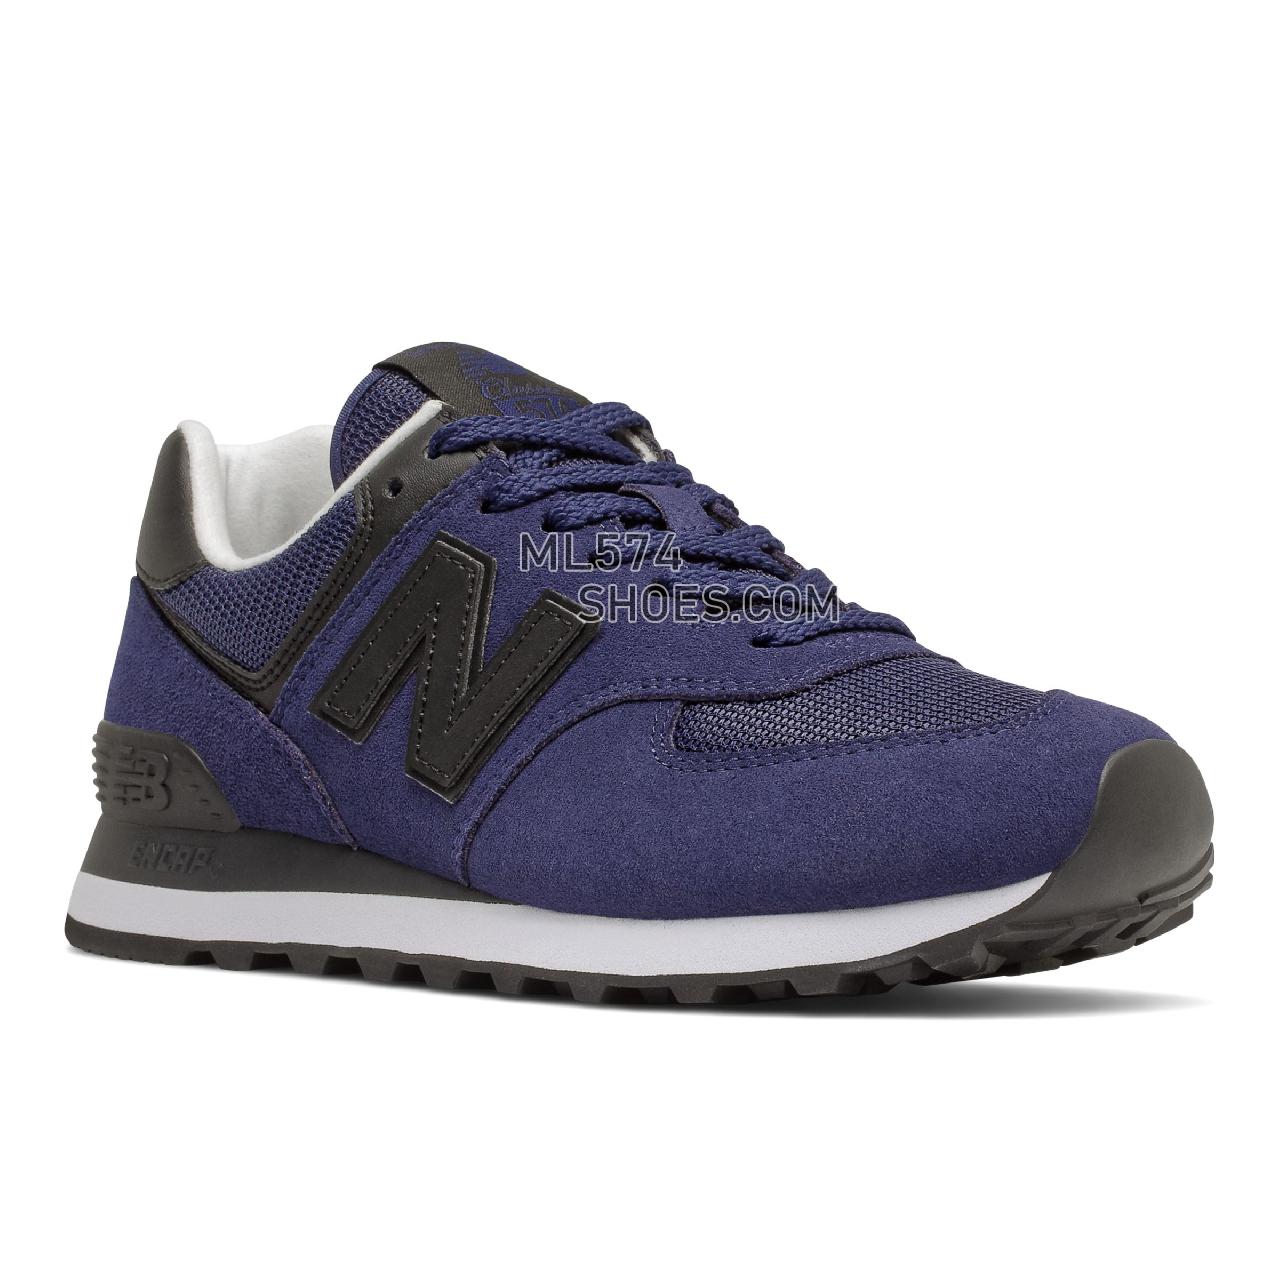 New Balance 574 - Women's Classic Sneakers - Night Tide with Black - WL574MB2